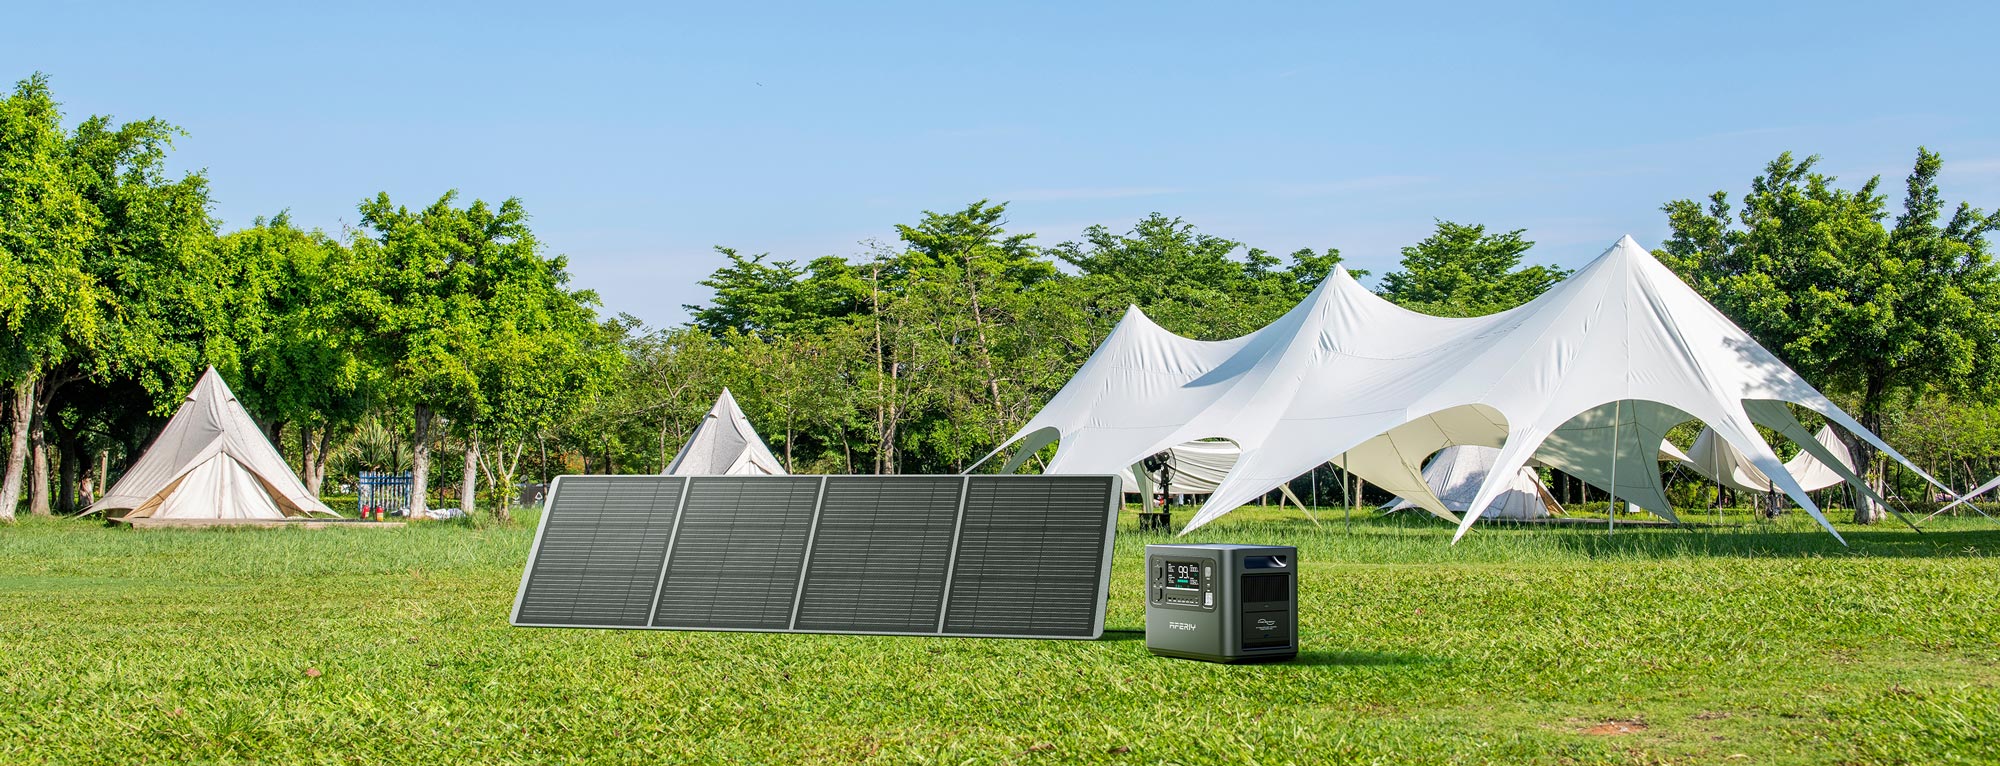 Using Portable Power Station and Solar Panels to Improve Your Camping Experience